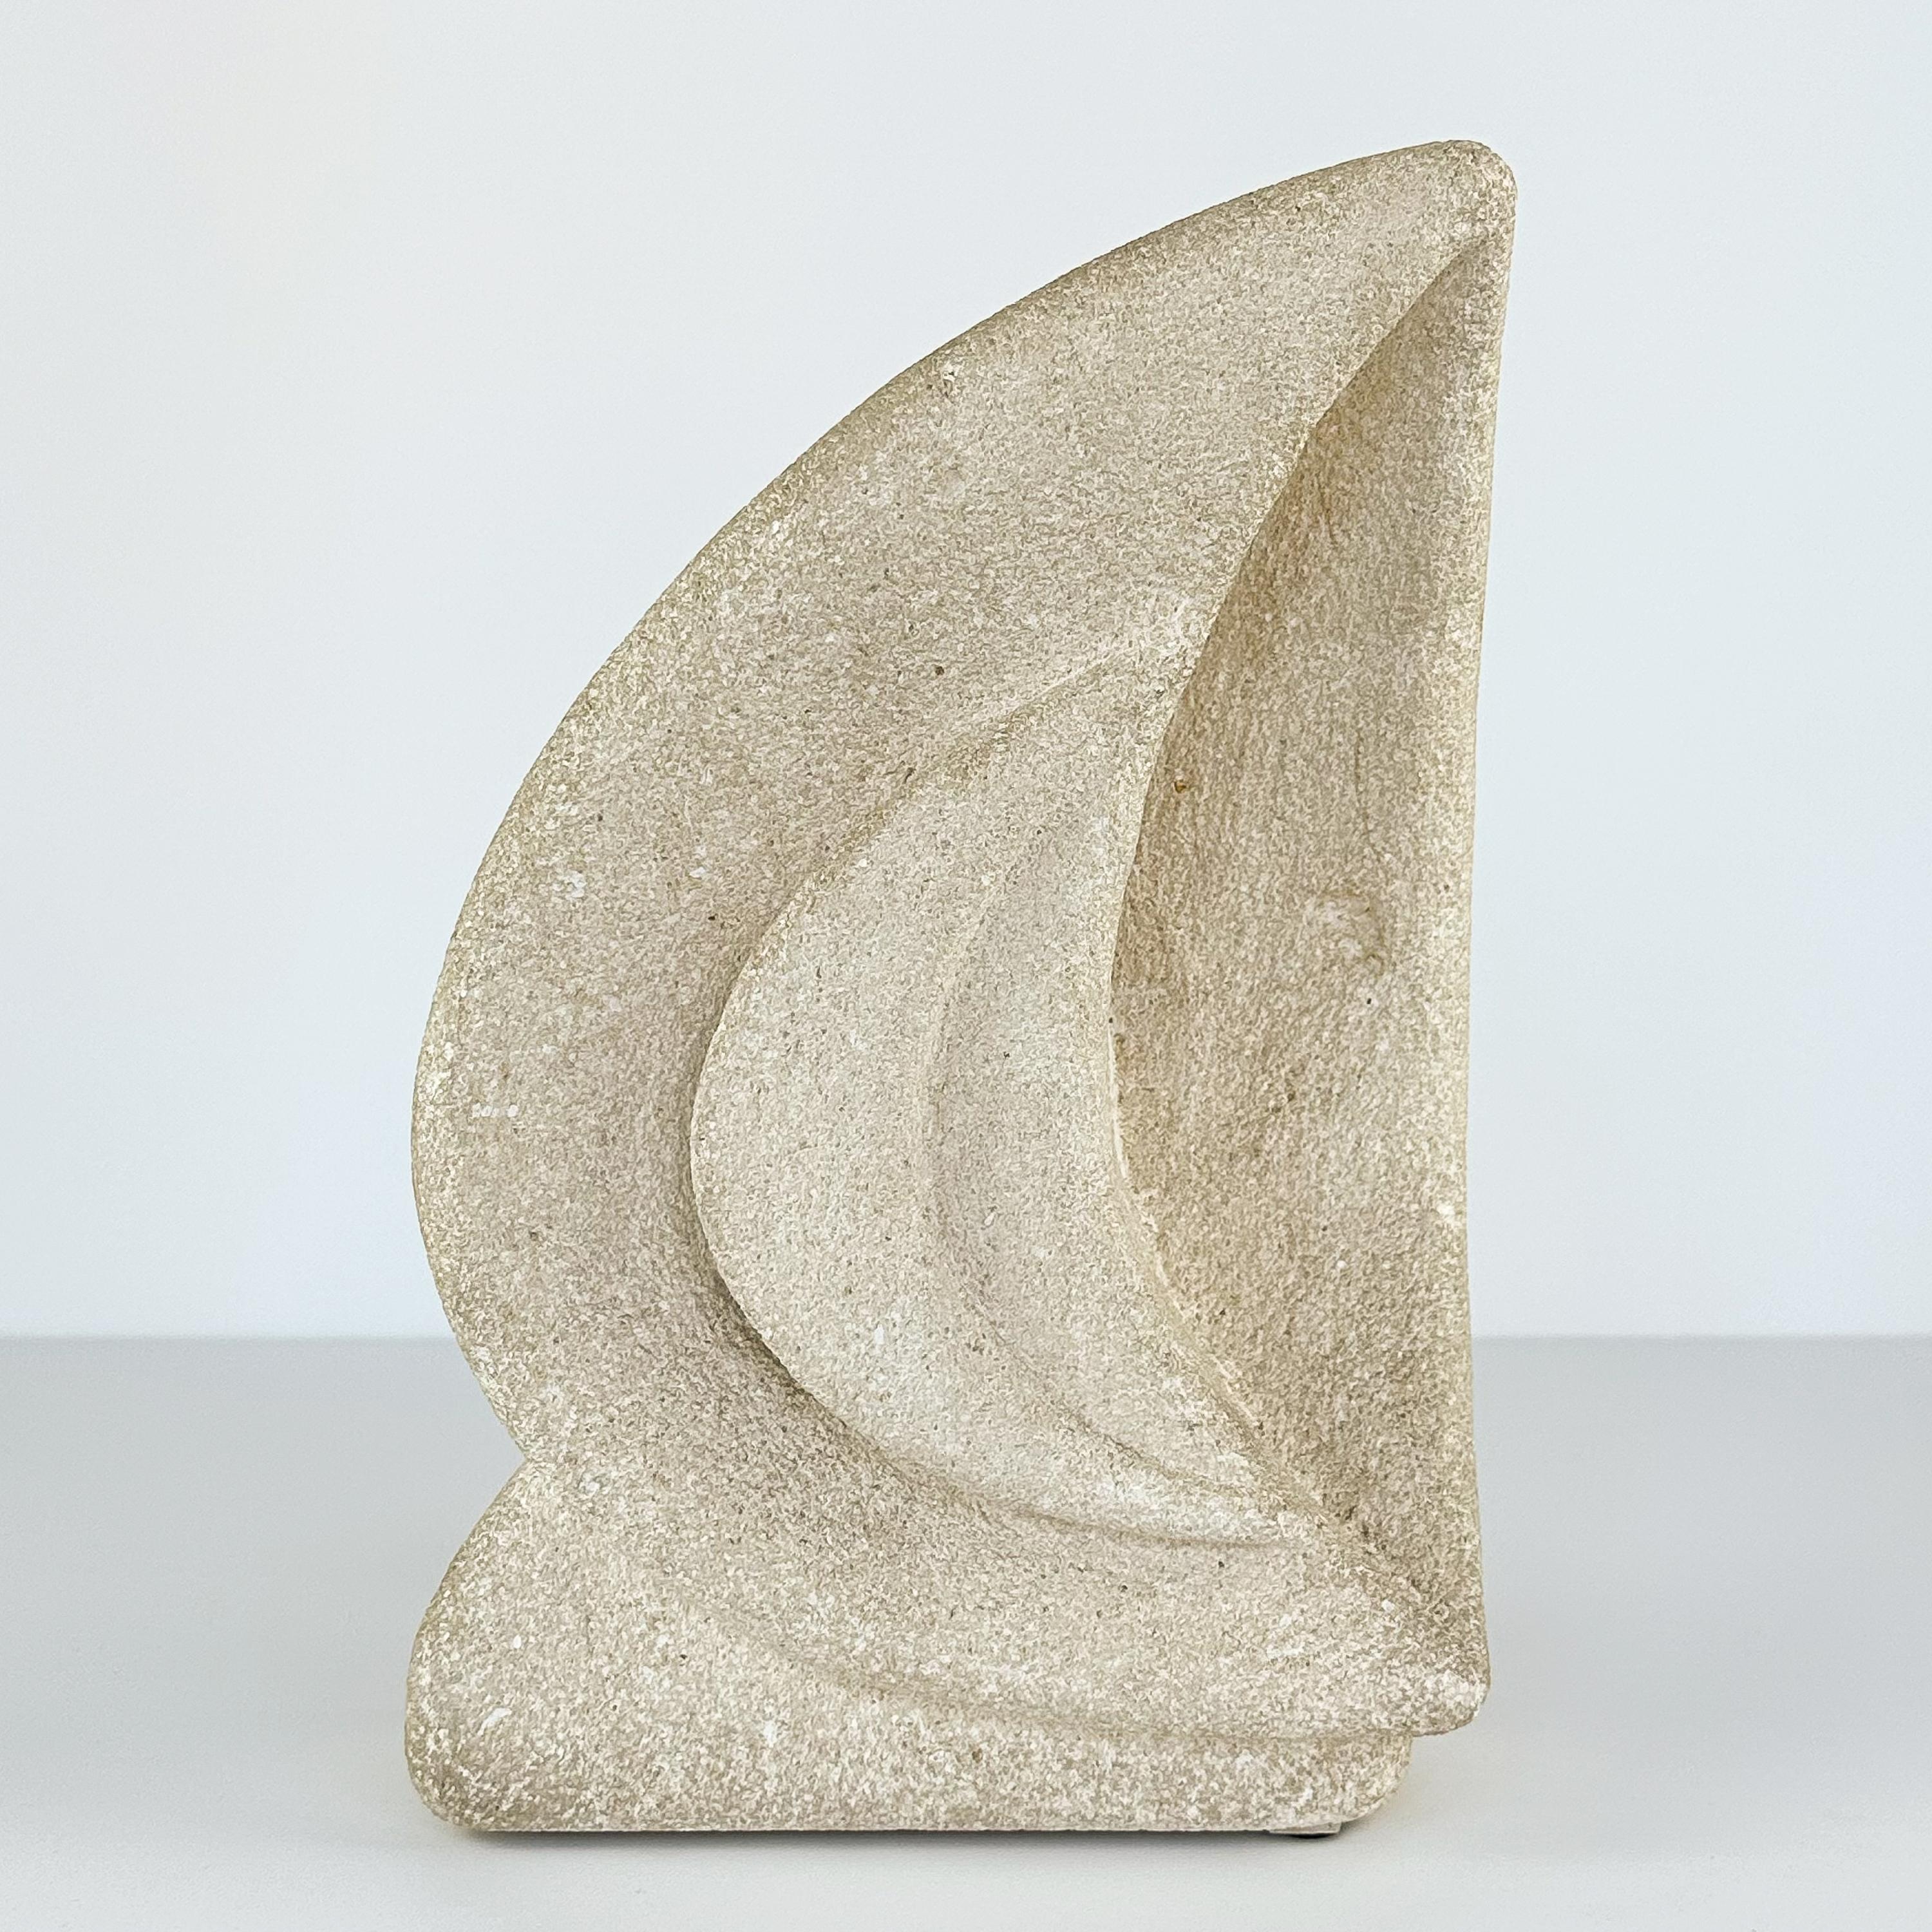 Albert Tormos hand carved solid limestone table lamp, France circa 1970s. A unique abstract sailboat or wave form. Albert Tormos was a Vallauris artist who also worked in St. Tropez during the period. Incised signature 